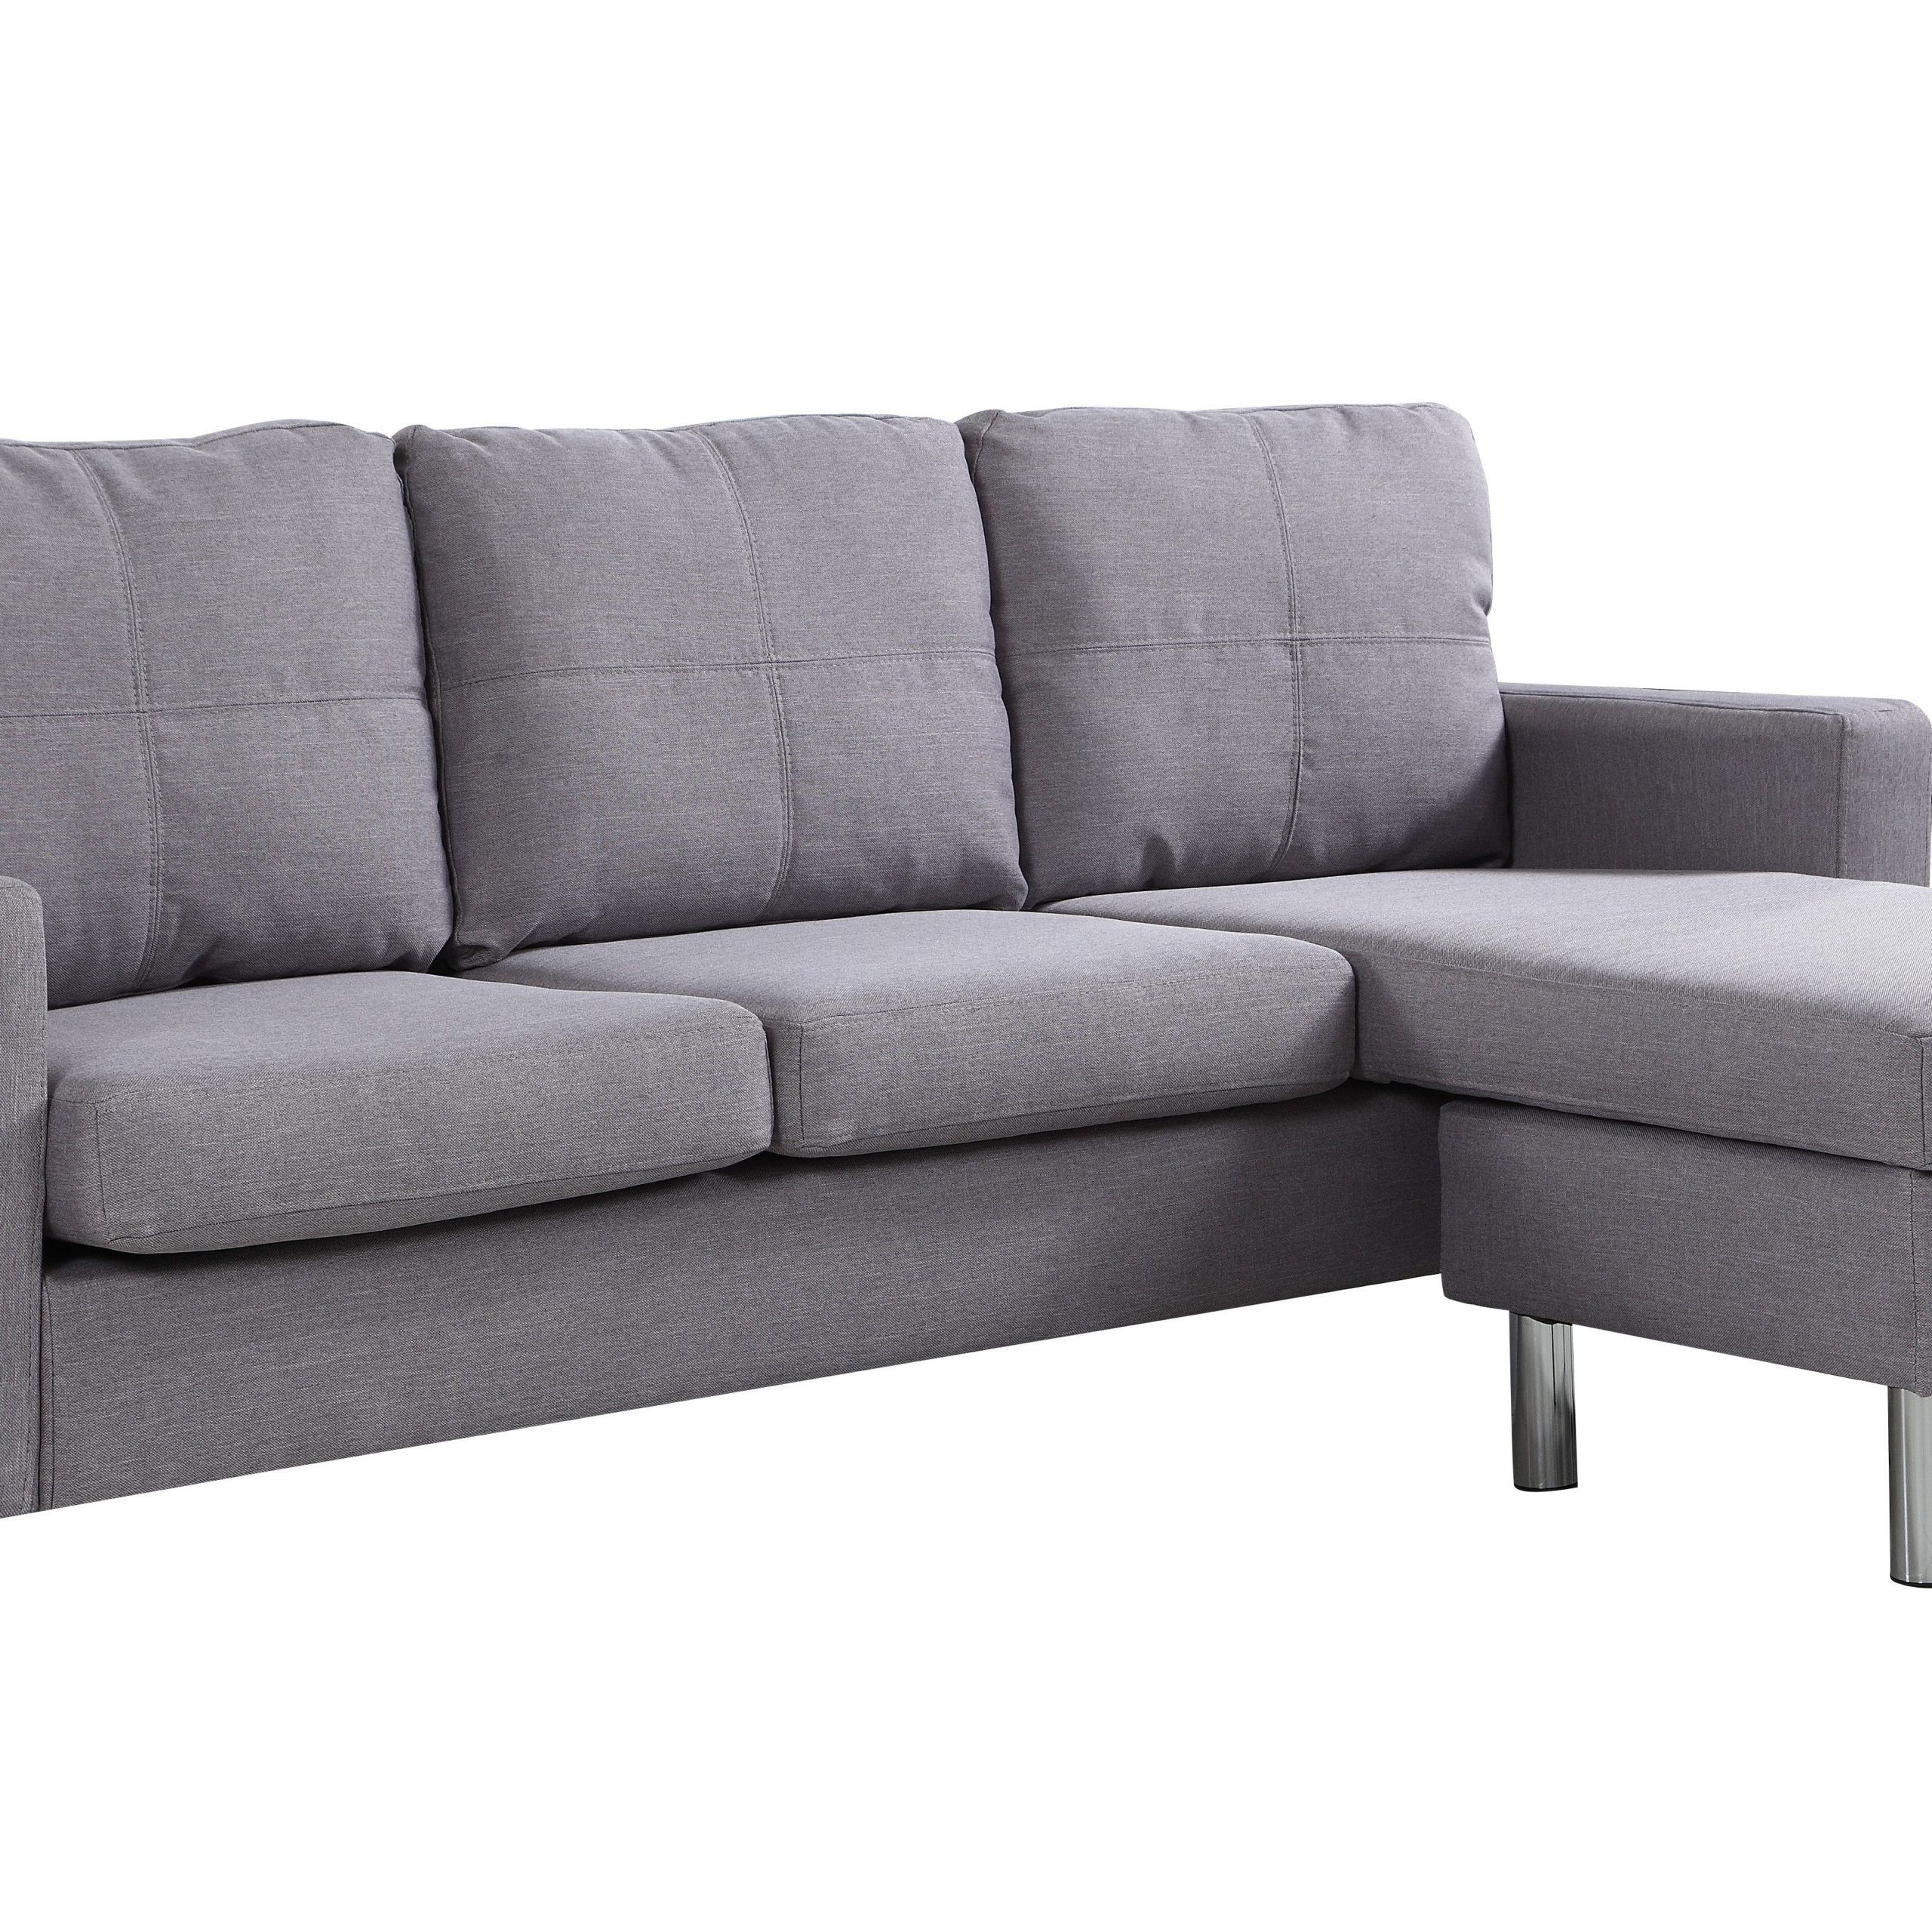 Modern Living Reversible Fabric Sectional Sofa, Light Grey Regarding 2pc Crowningshield Contemporary Chaise Sofas Light Gray (View 4 of 15)